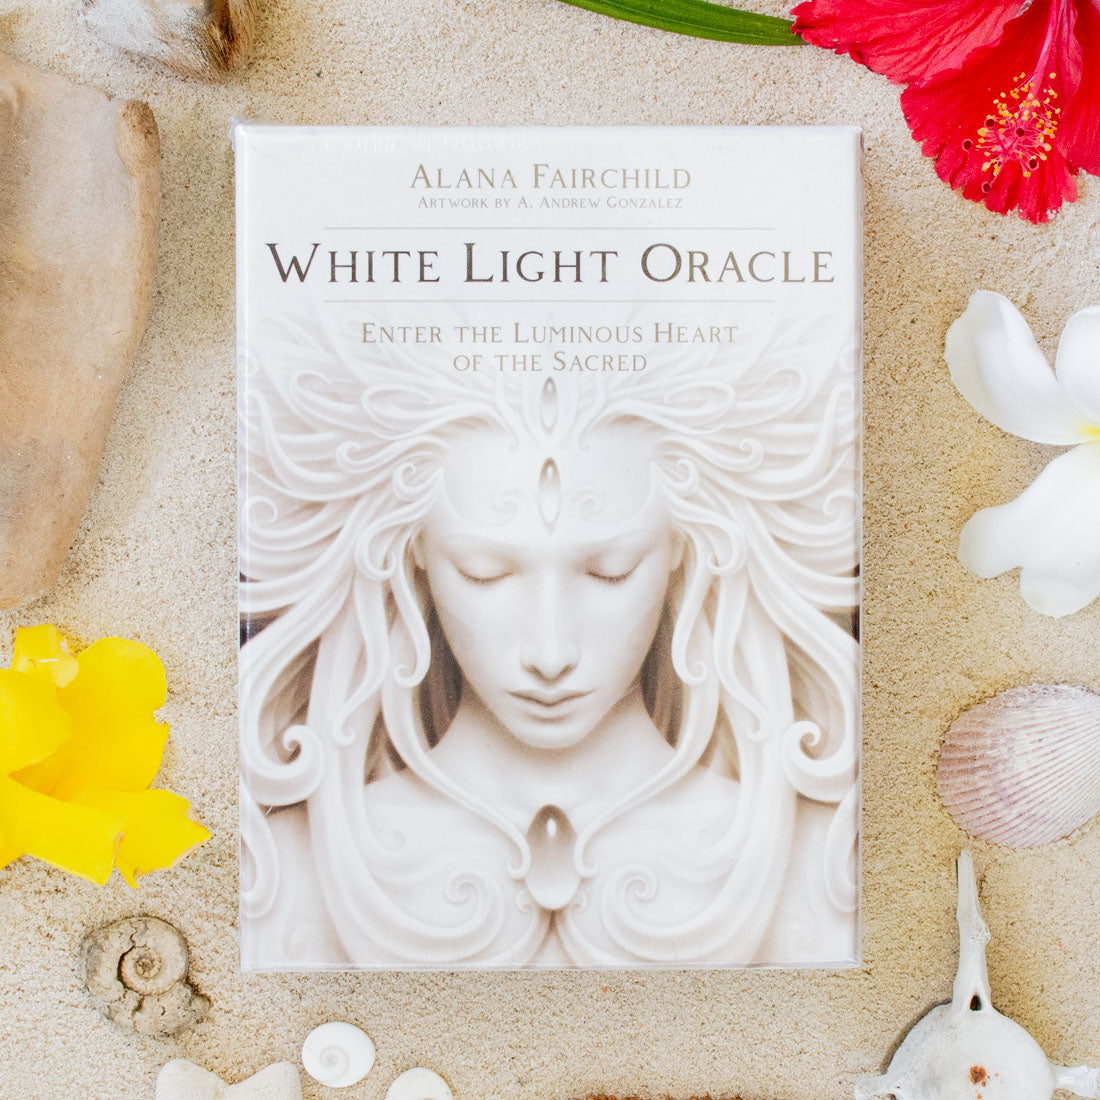 The White Light Oracle